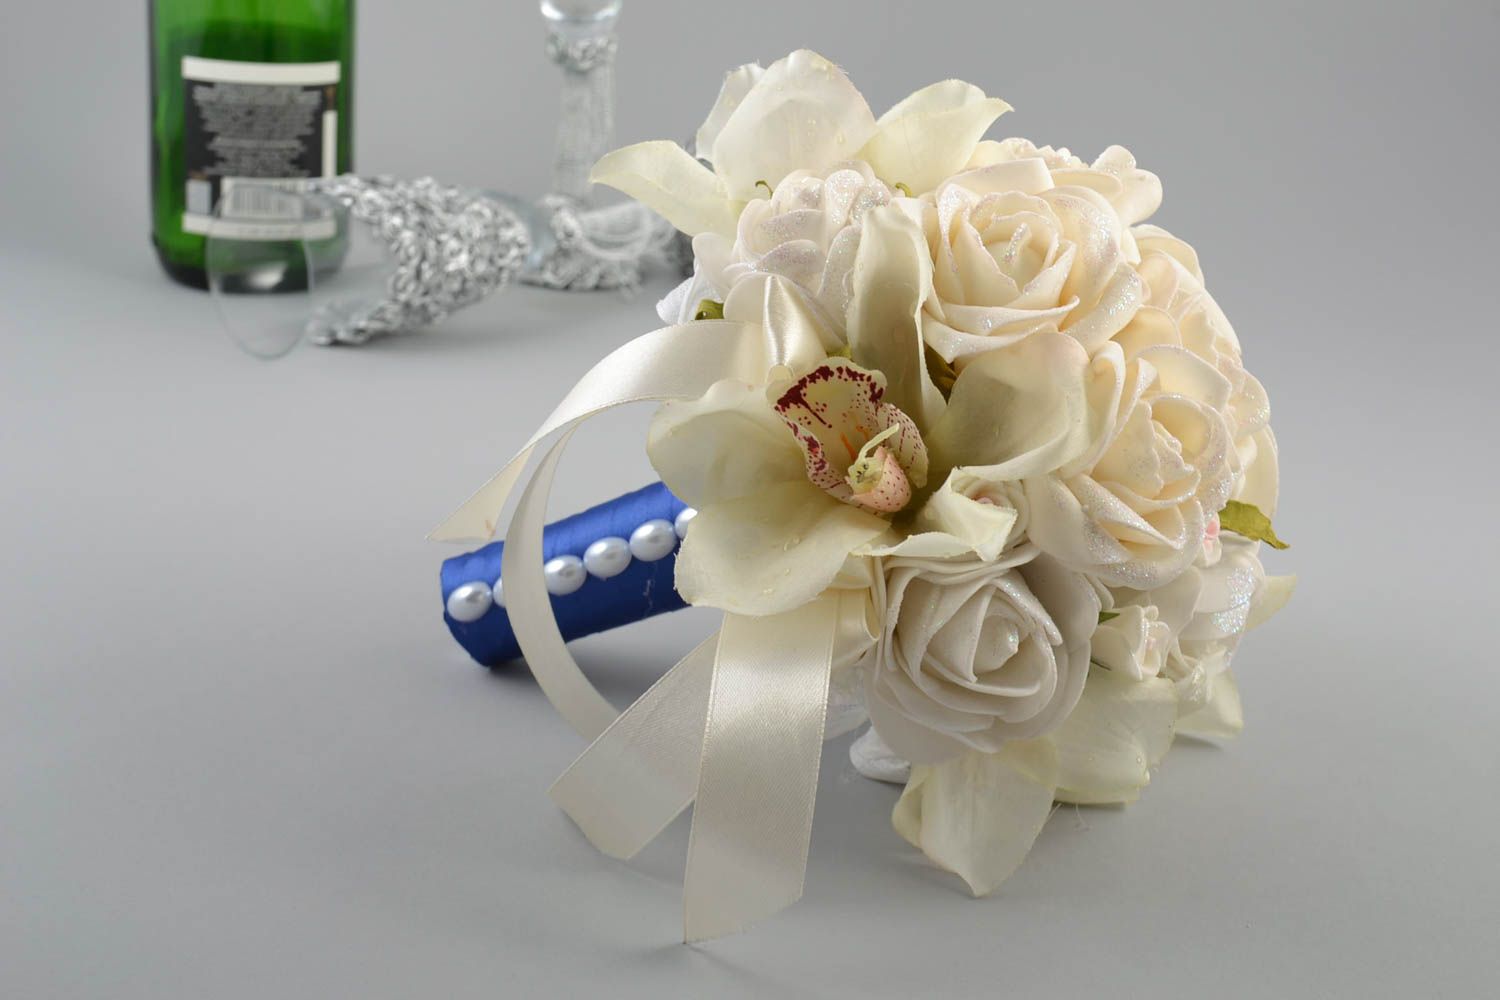 Handmade cute white wedding bouquet made of foamiran on blue stem with ribbons photo 1